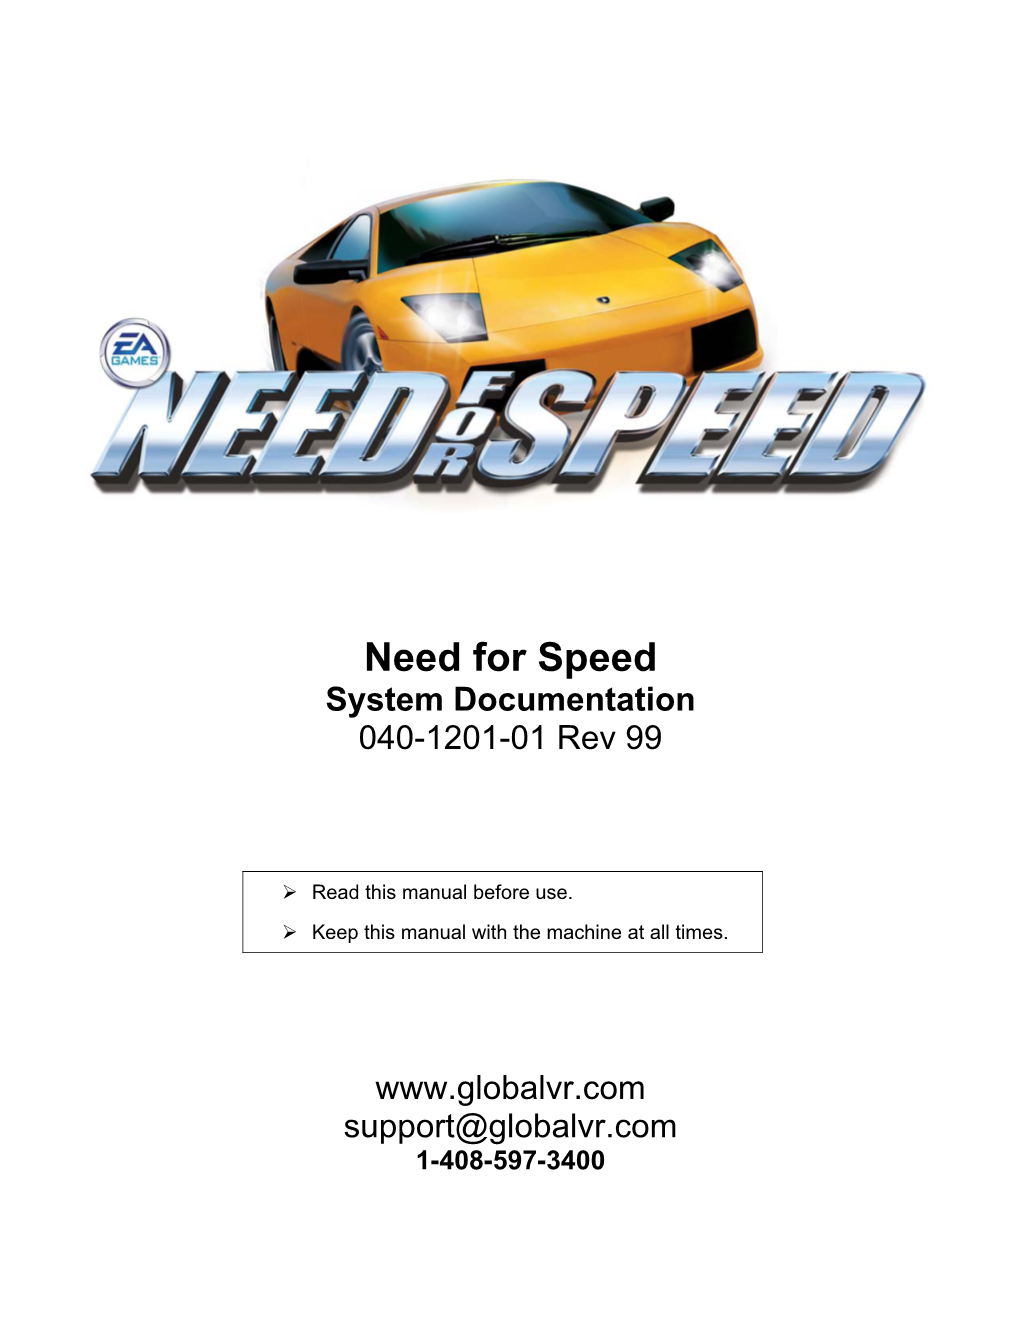 Need for Speed System Documentation 040-1201-01 Rev 99